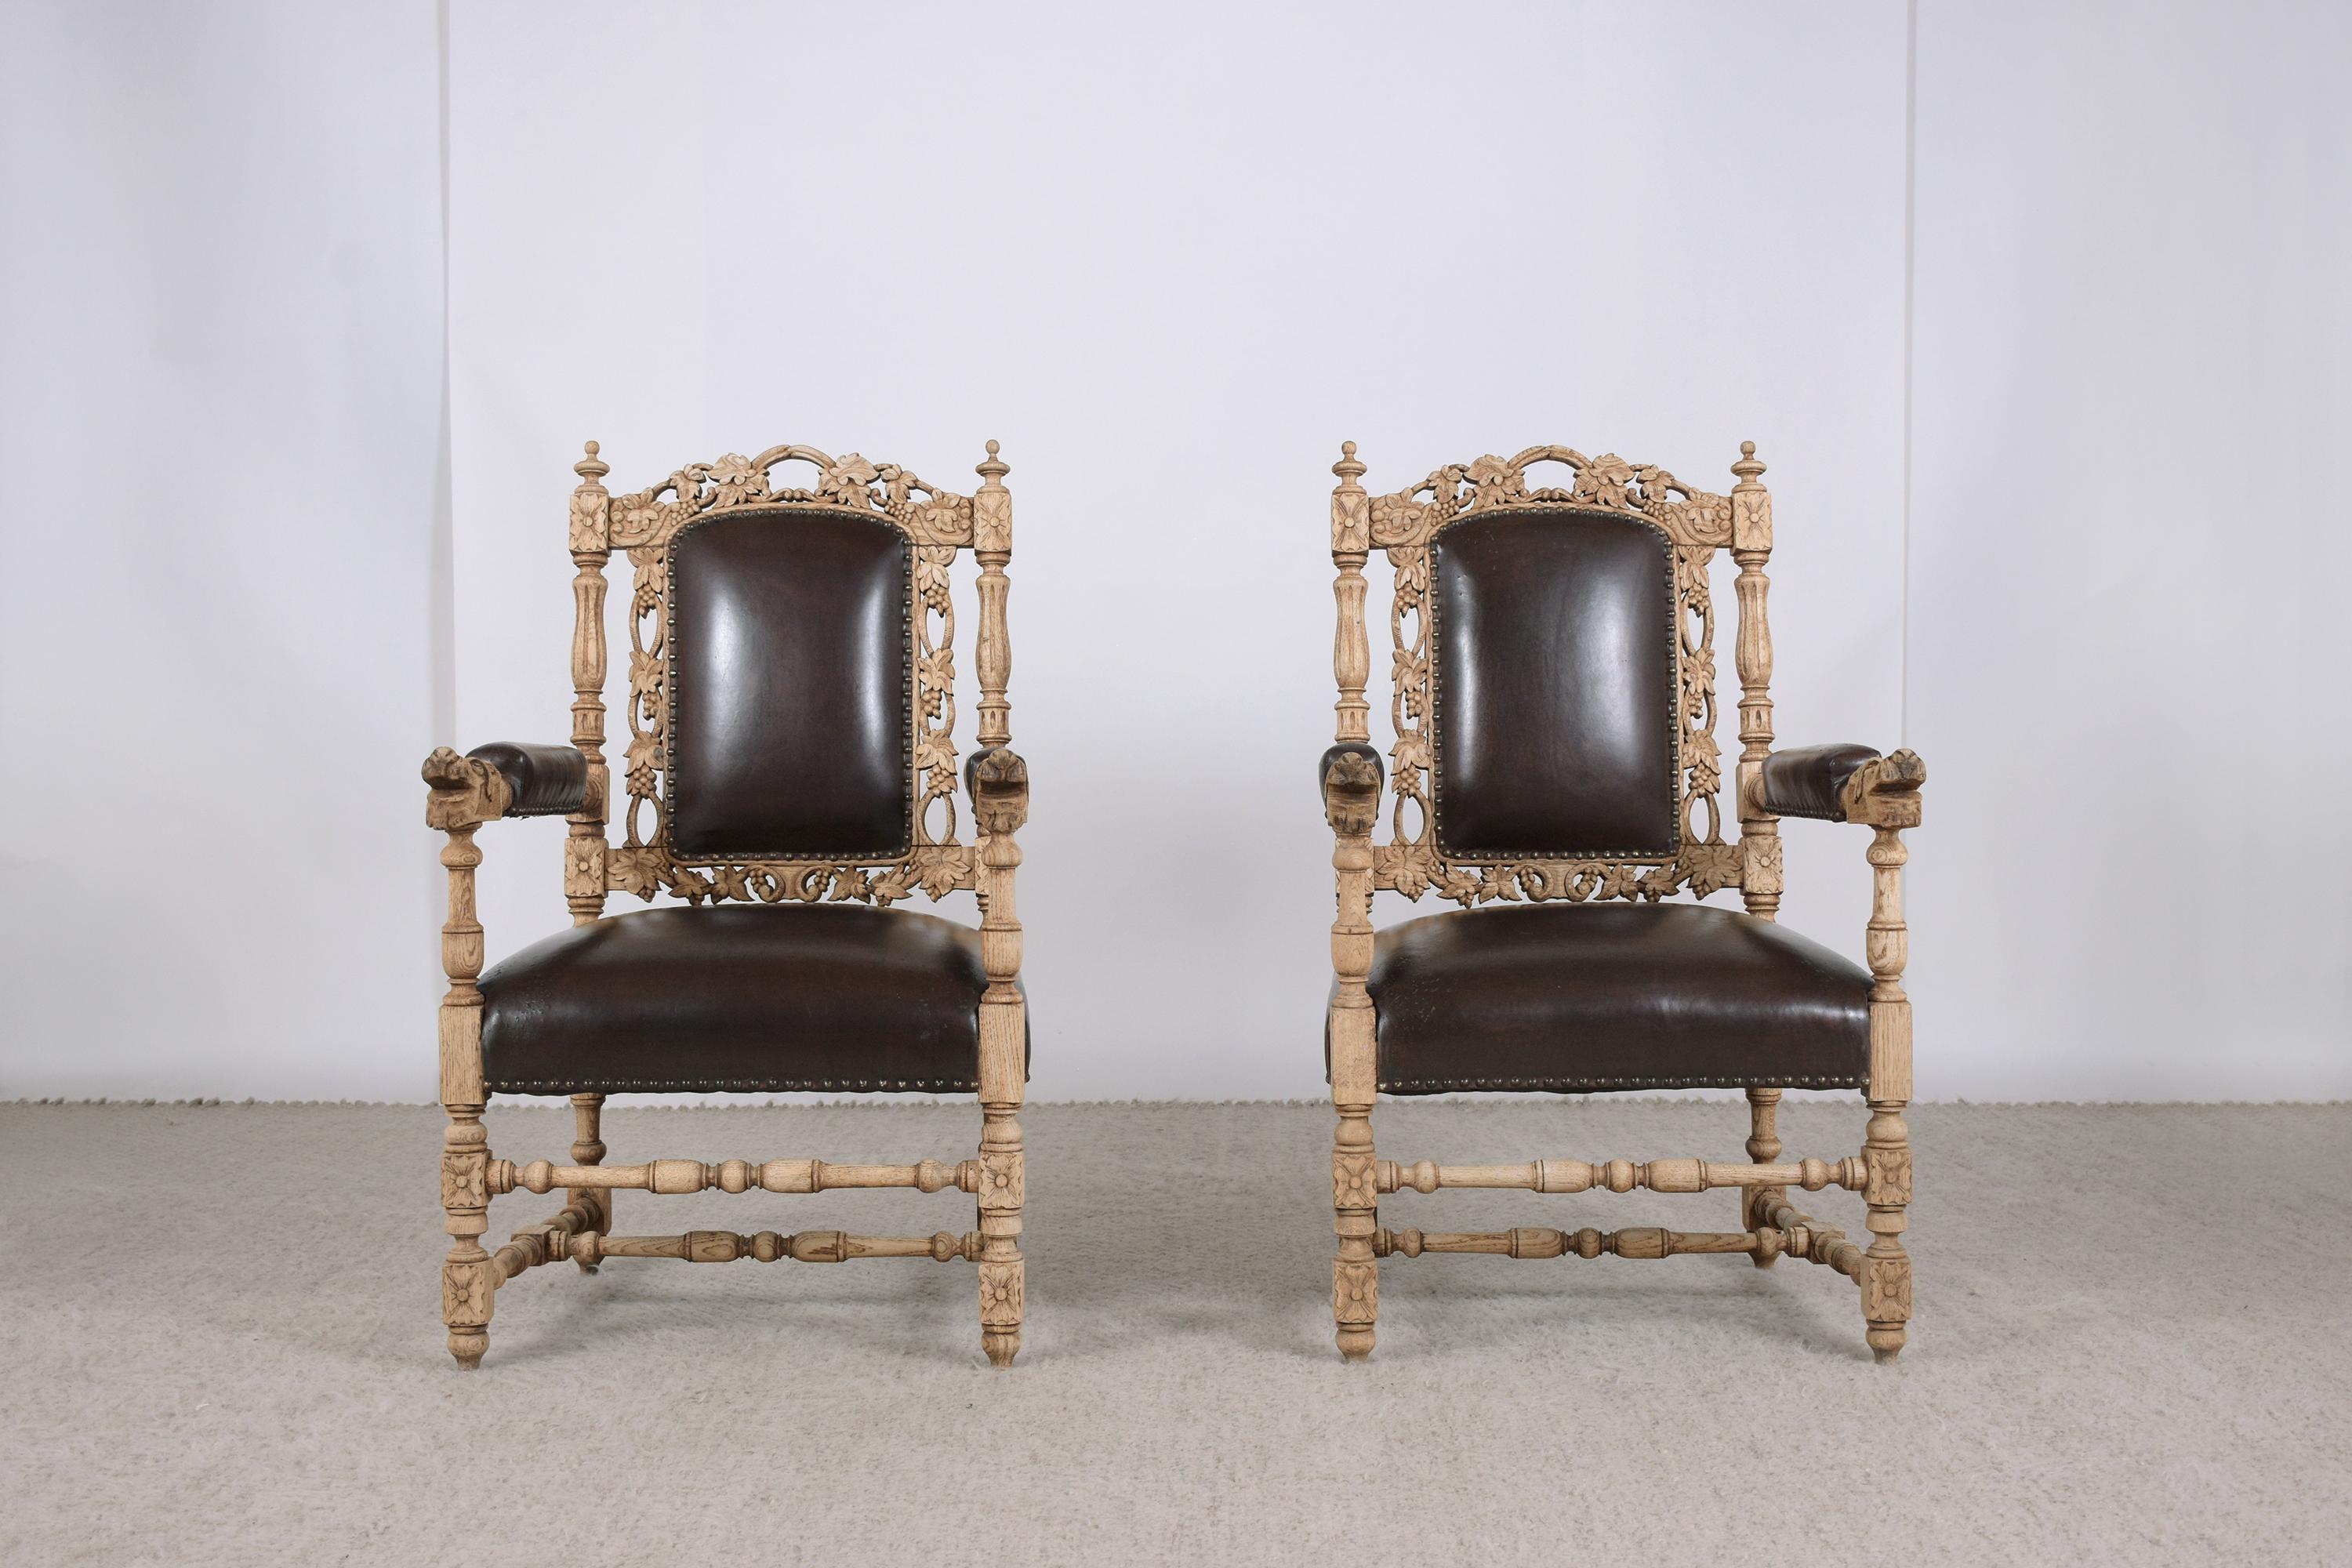 An extraordinary pair of antique french carved leather armchairs in great condition and professionally restored by our expert craftsmen team. These pieces are eye-catching beautifully crafted out of solid oak wood newly bleached, feature hand-carved